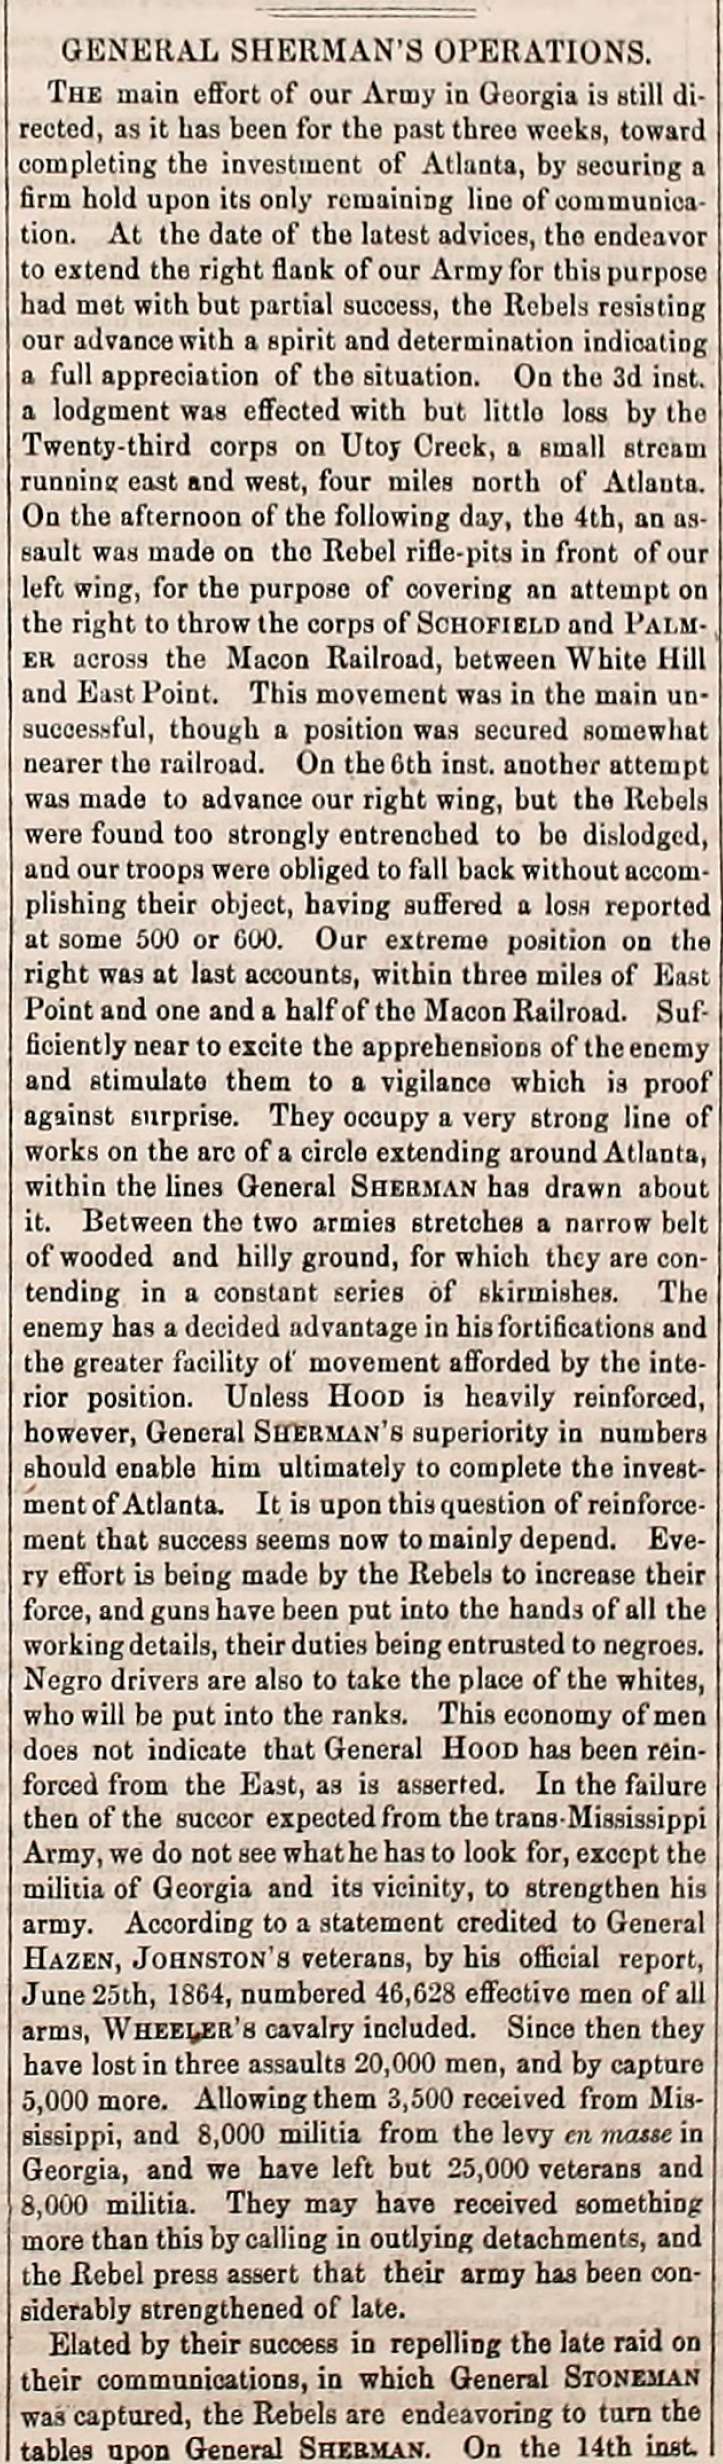 Army Navy Journal Article on the early days of Sherman's March